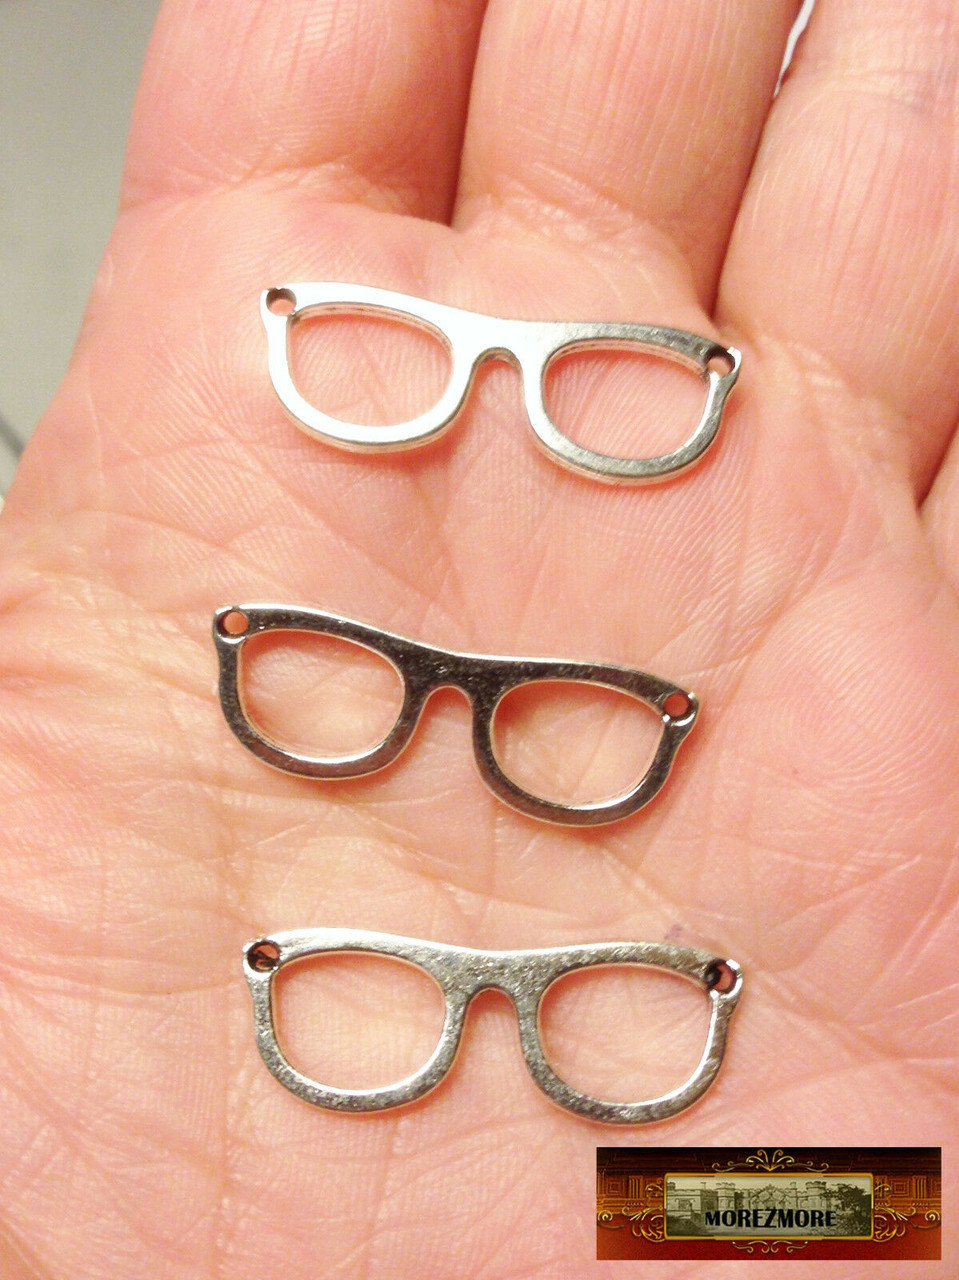 Pin on Spectacles